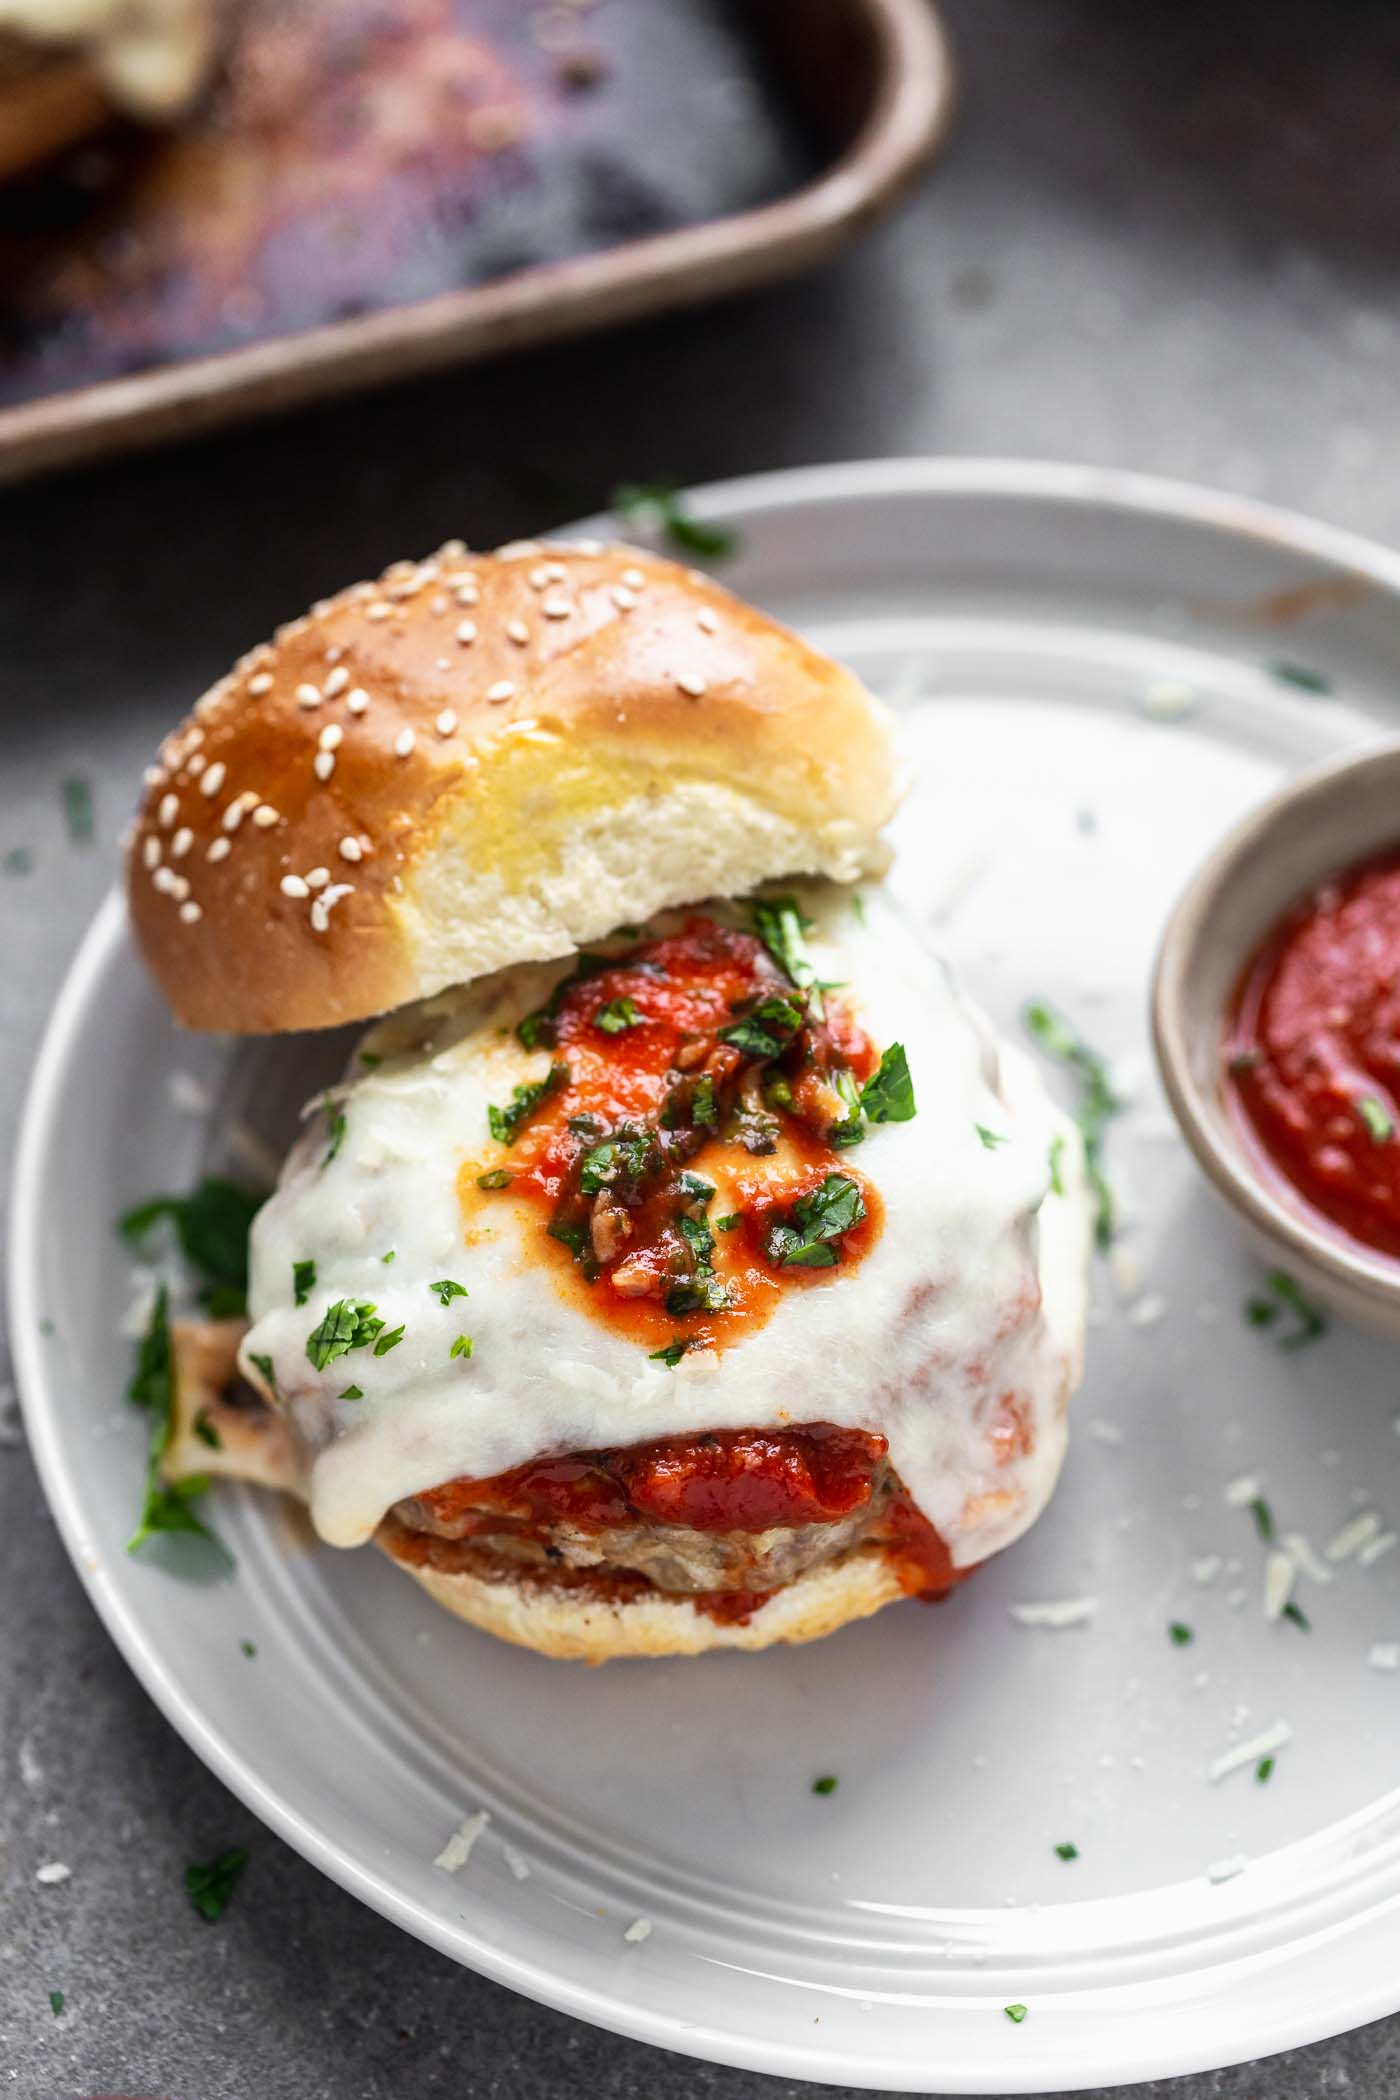 Turkey Meatball Burger Melts are basically a tender, moist, and FLAVORFUL meatball transformed into a burger. The 